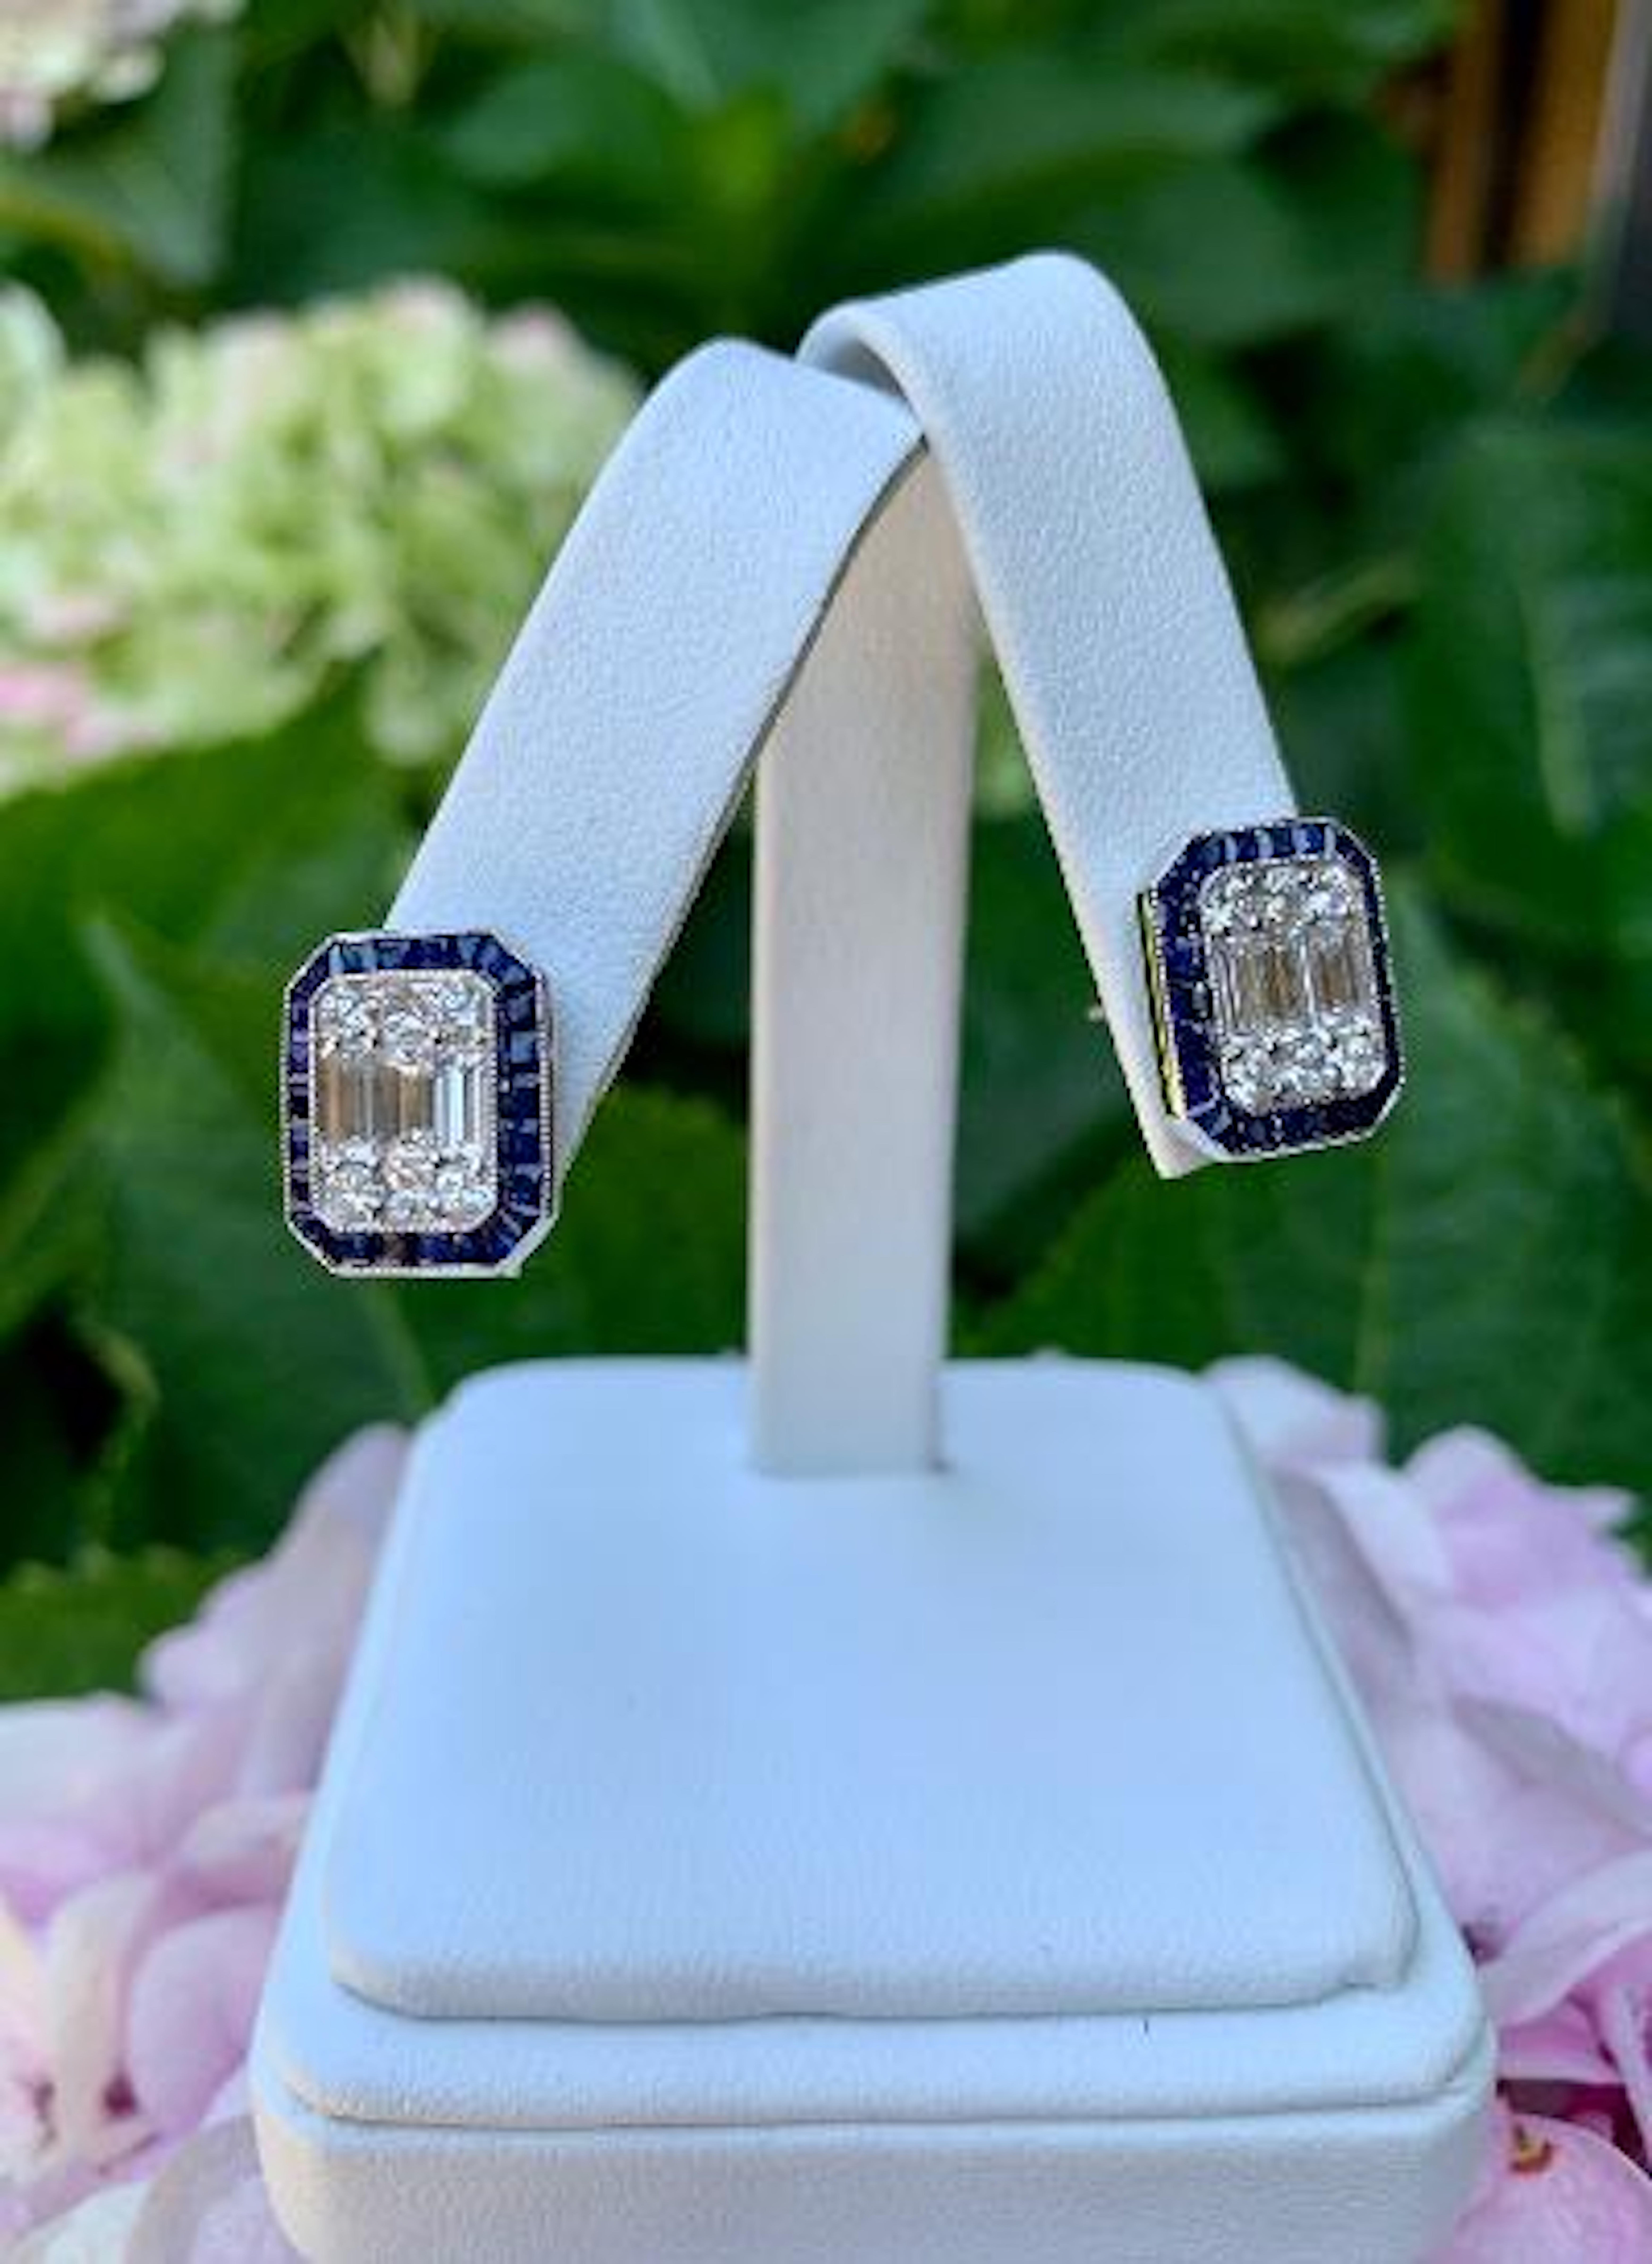 Beautiful pair of 18 karat white gold classic Art Deco style post earrings feature invisibly set baguette and round brilliant diamonds which give the illusion of a very large, cut corner rectangular step cut diamond in the center of each earring.